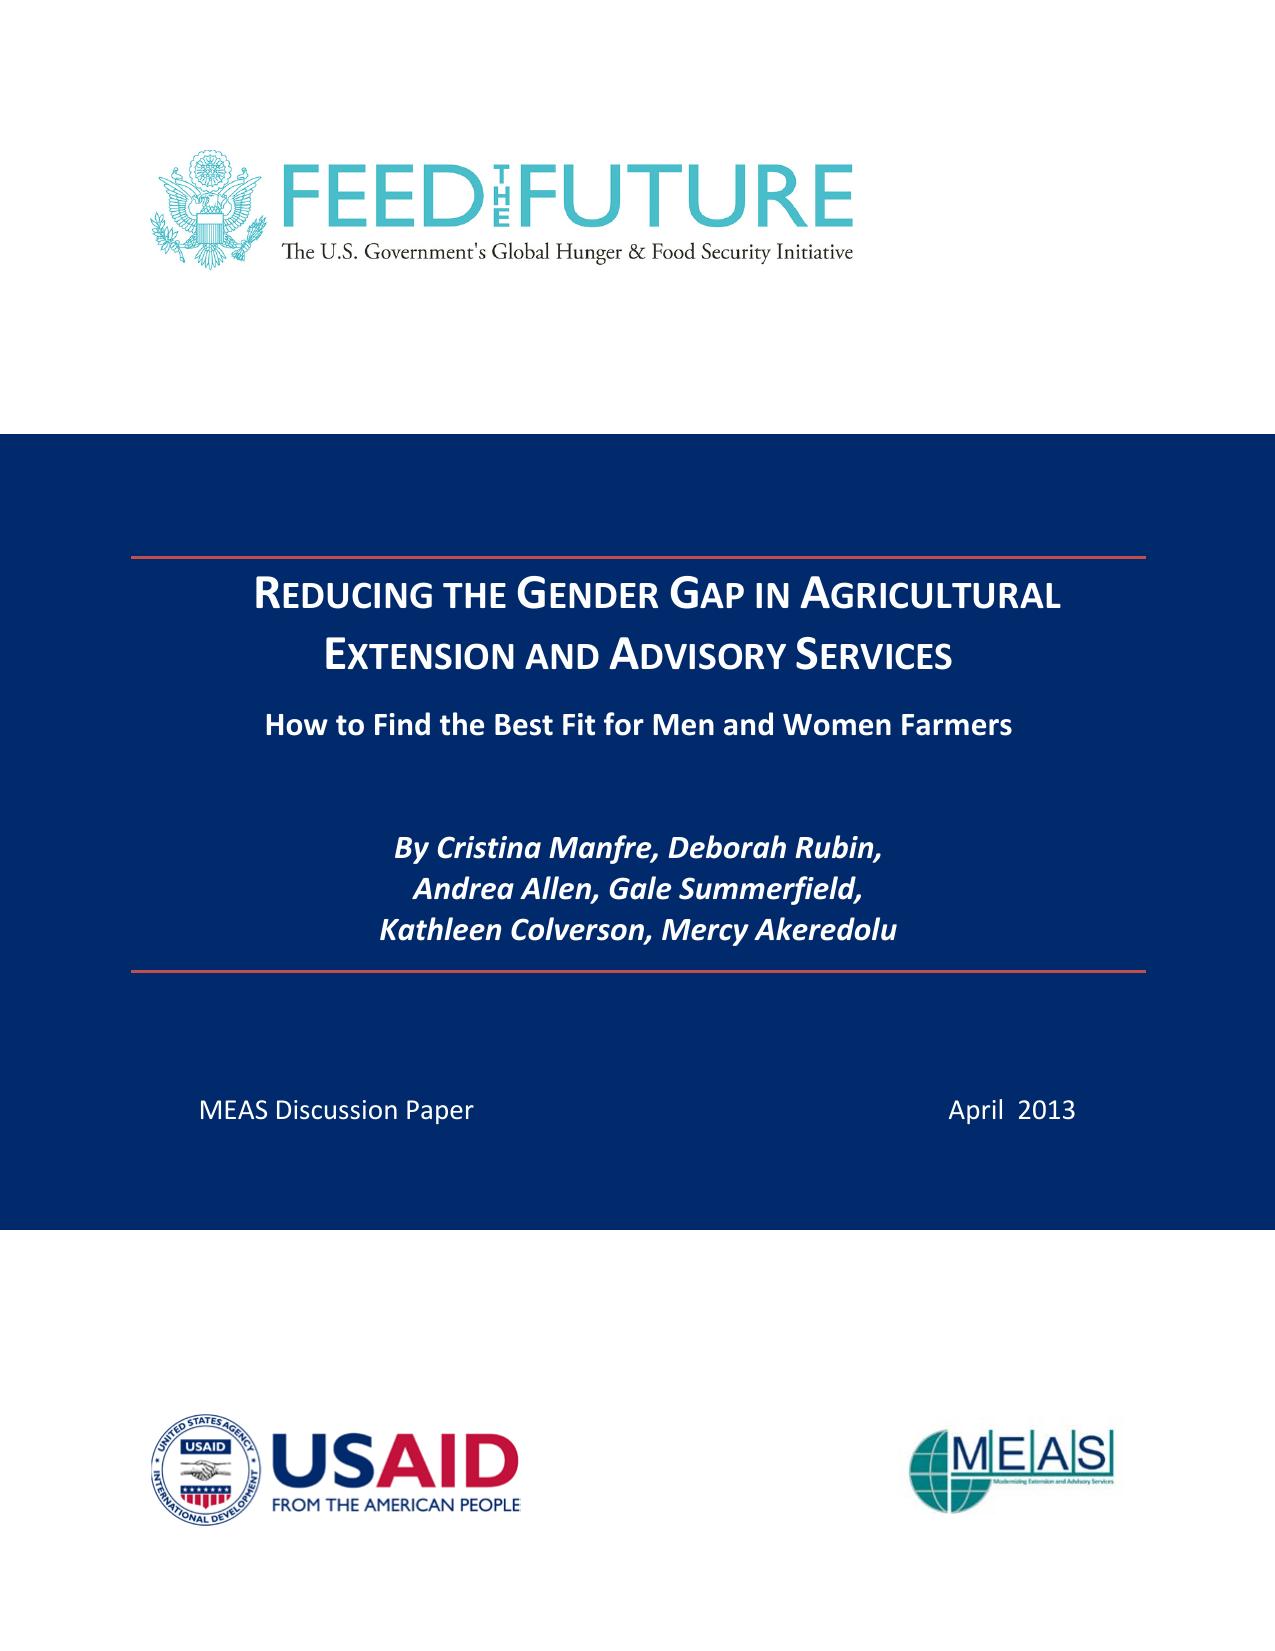 Reducing the gender gap in agricultural extension and advisory services 2013